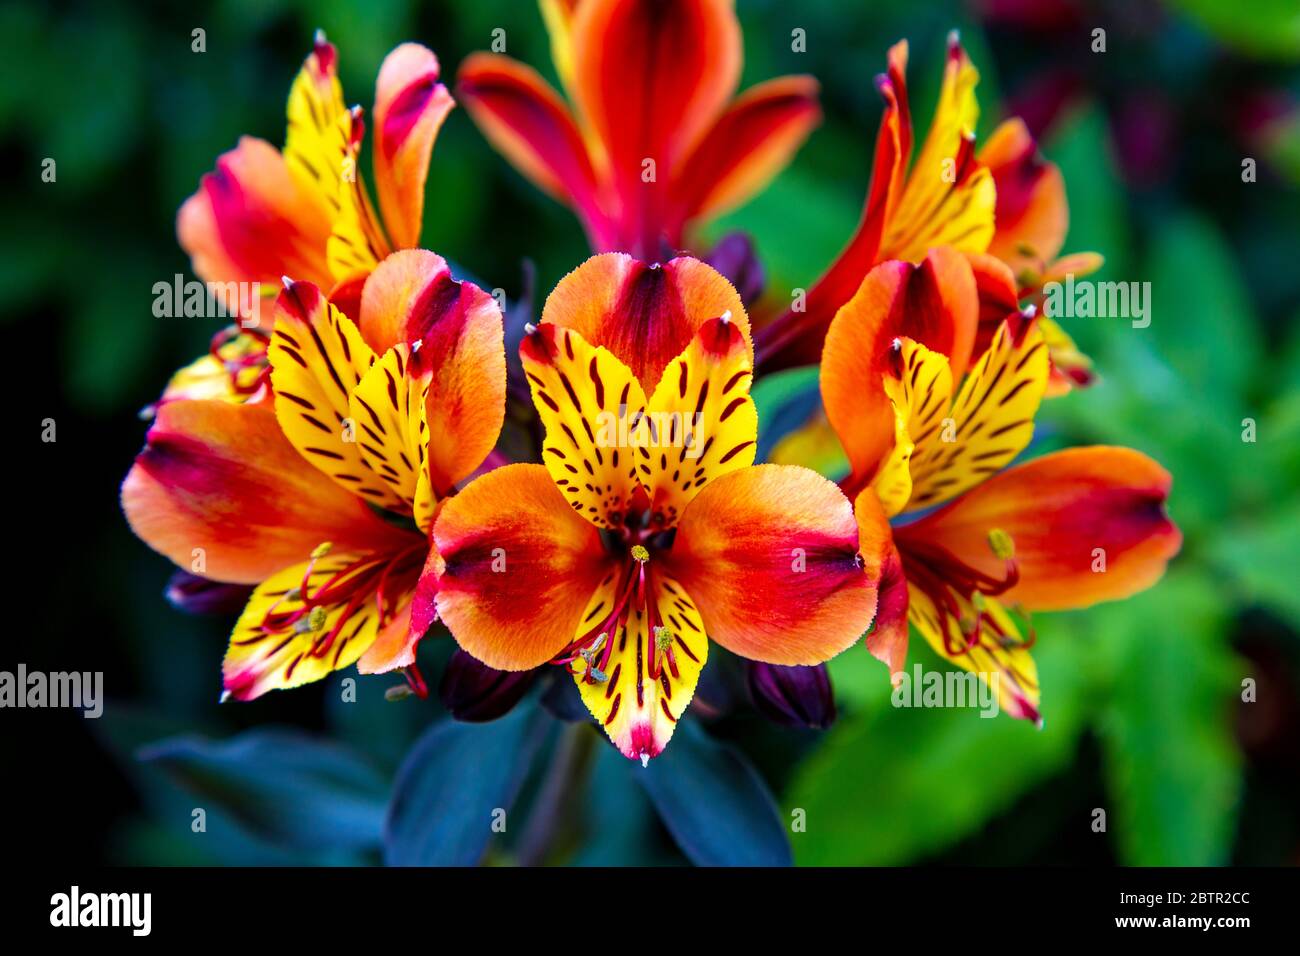 Bright yellow orange and red flowers with small stripes, Alstroemeria Indian Summer 'Tesronto' aka Peruvian lily flowers or Lily of the Incas Stock Photo